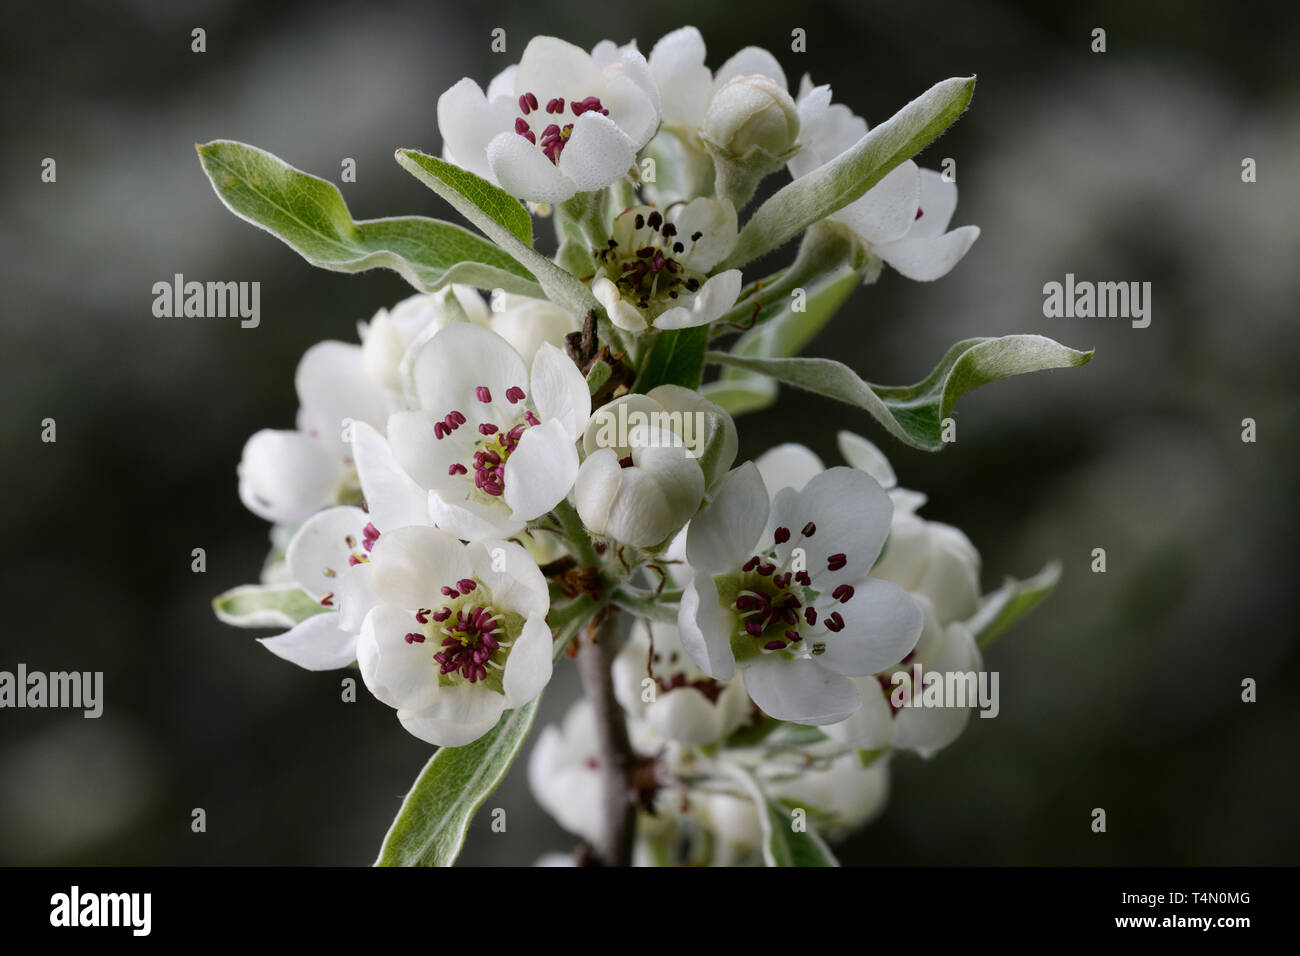 Weeping Willow-leaved Pear (Pyrus salicifolia 'Pendula'), flowers Stock Photo